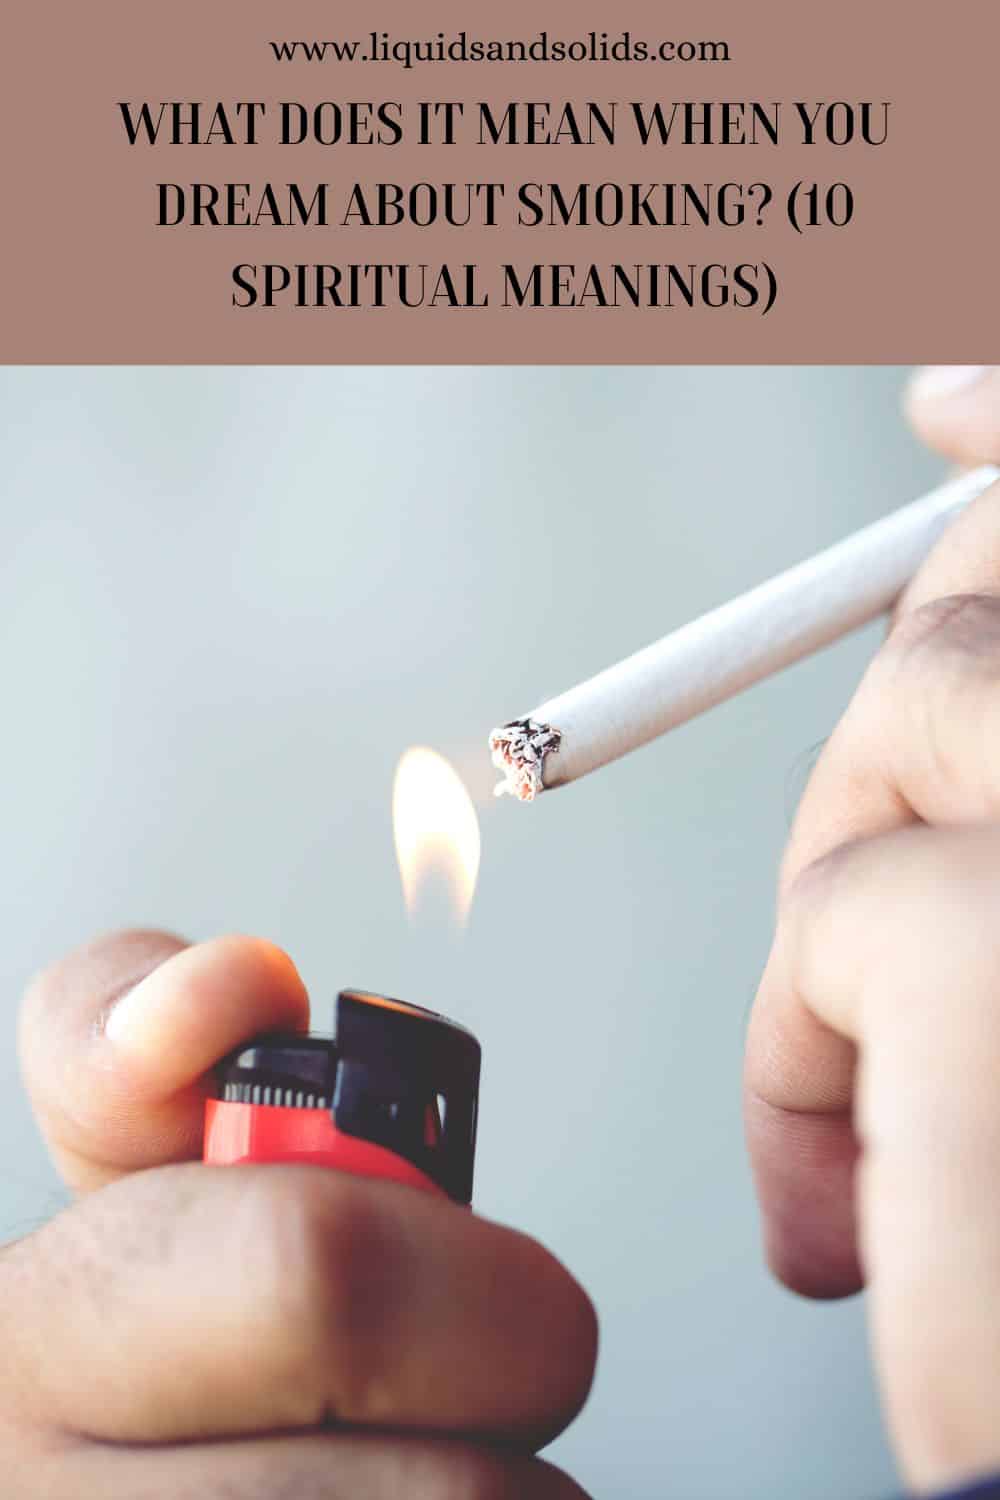 What Does It Mean When You Dream About Smoking? (10 Spiritual Meanings)